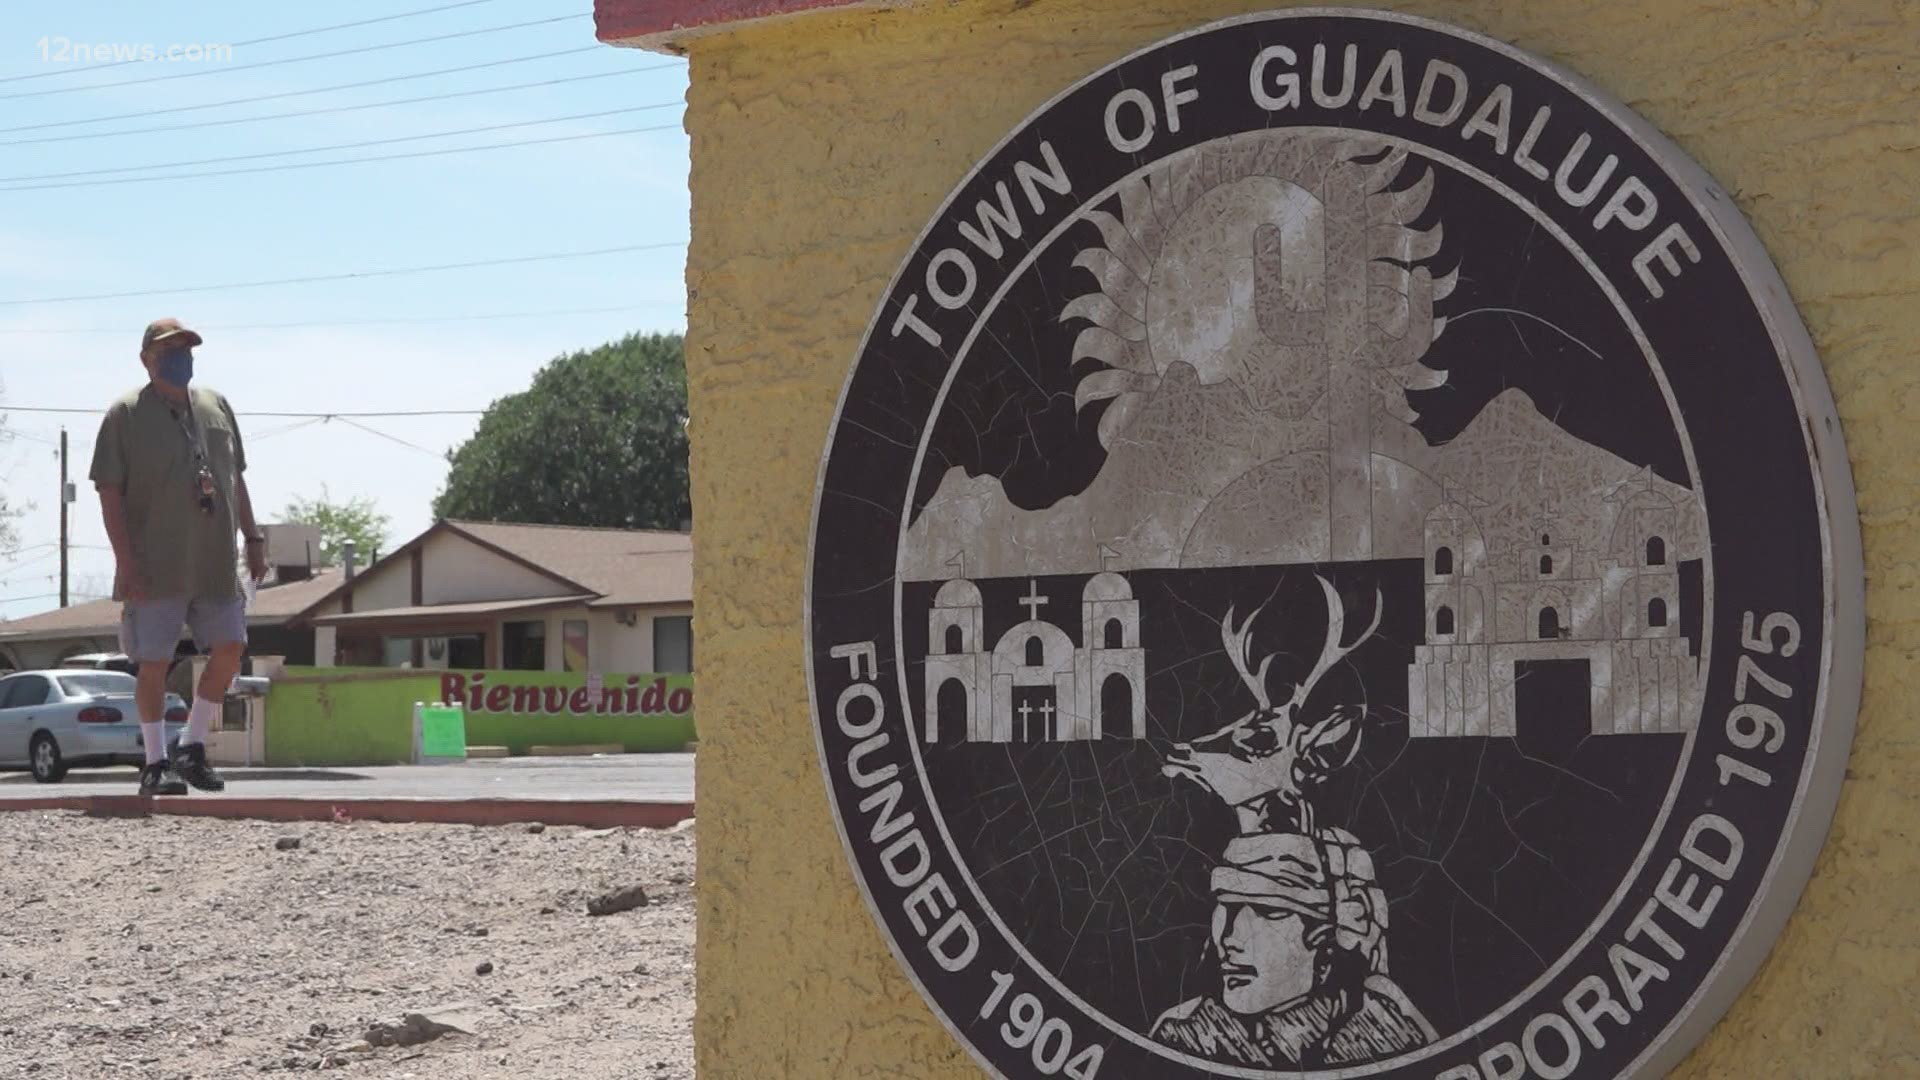 6,600 people live in Guadalupe. 70% are Latino and 30% are part of the Pascua Yaqui Tribe. The town has aggressively worked to get 44% of all residents vaccinated.